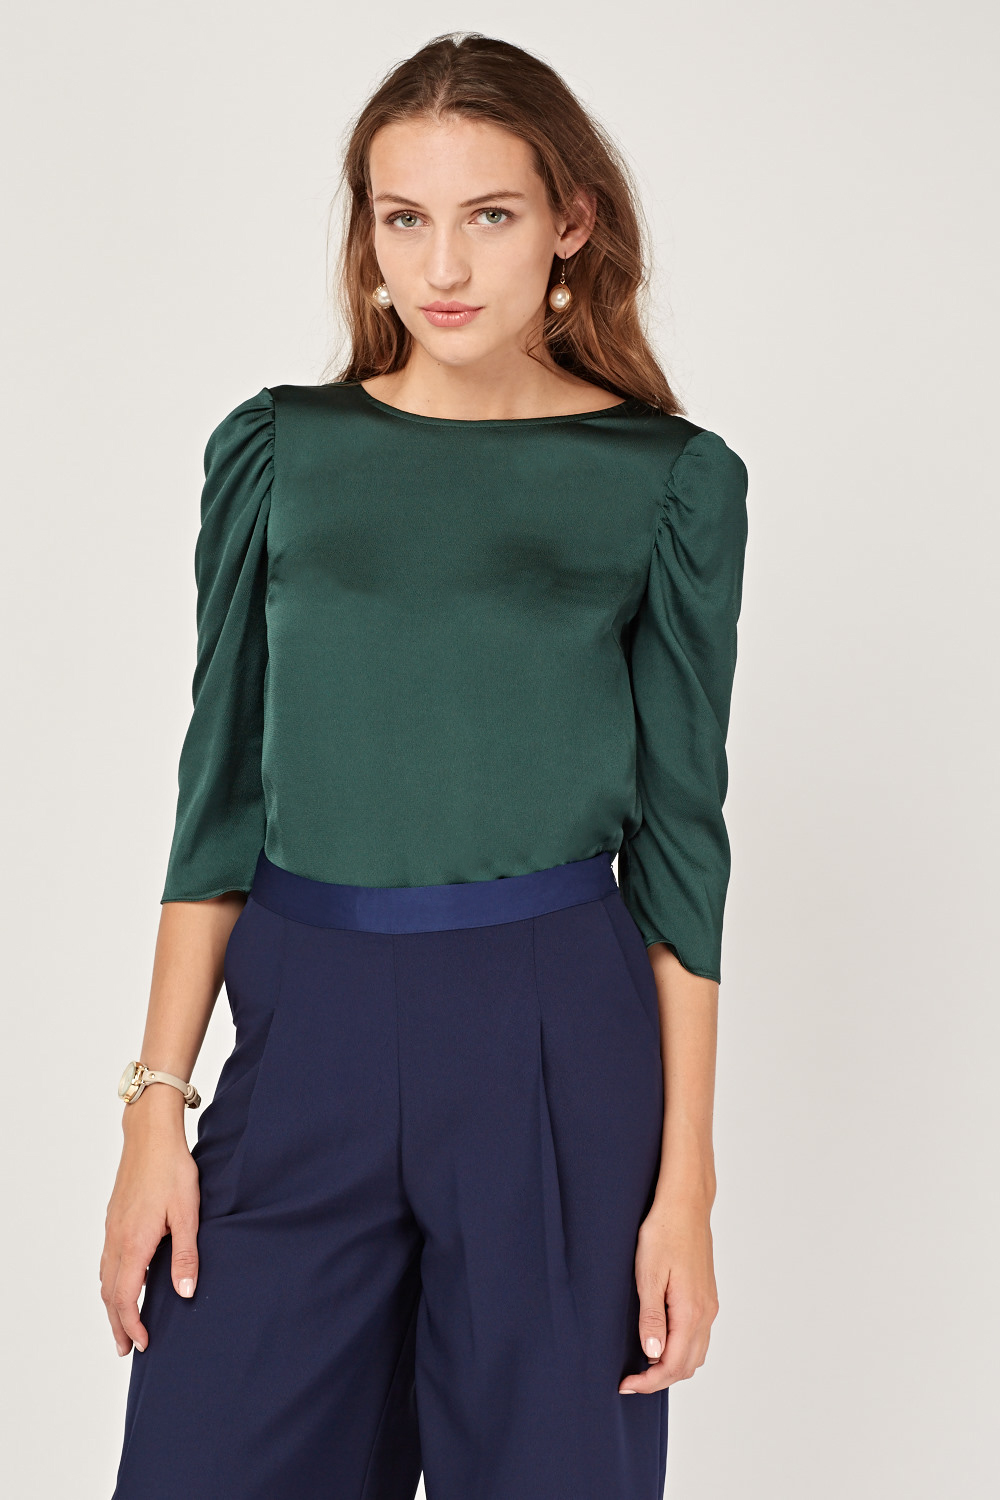 Ruched Sleeve Dark Green Blouse - Just $7